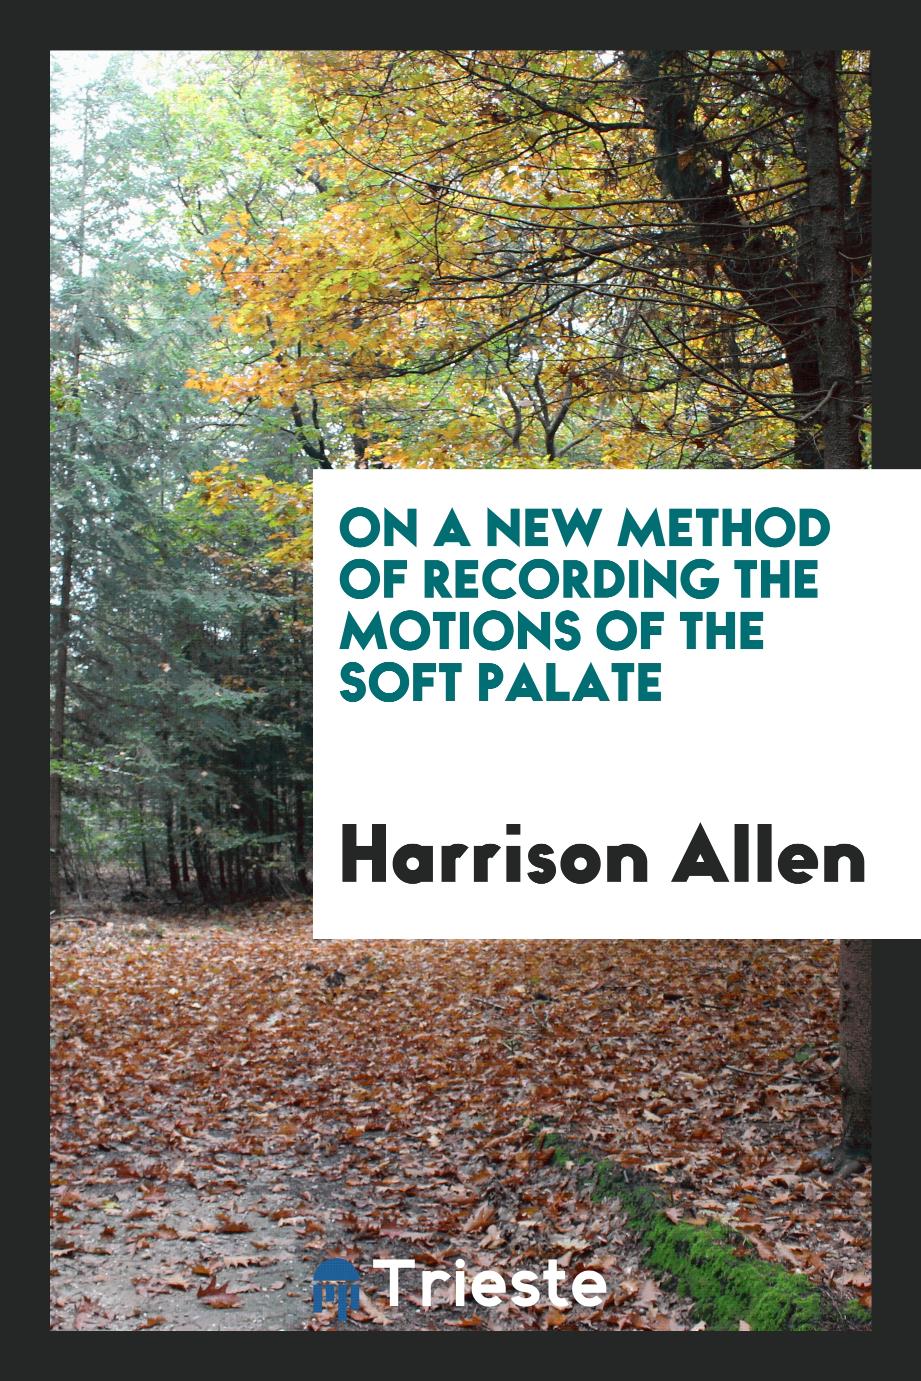 On a new method of recording the motions of the soft palate